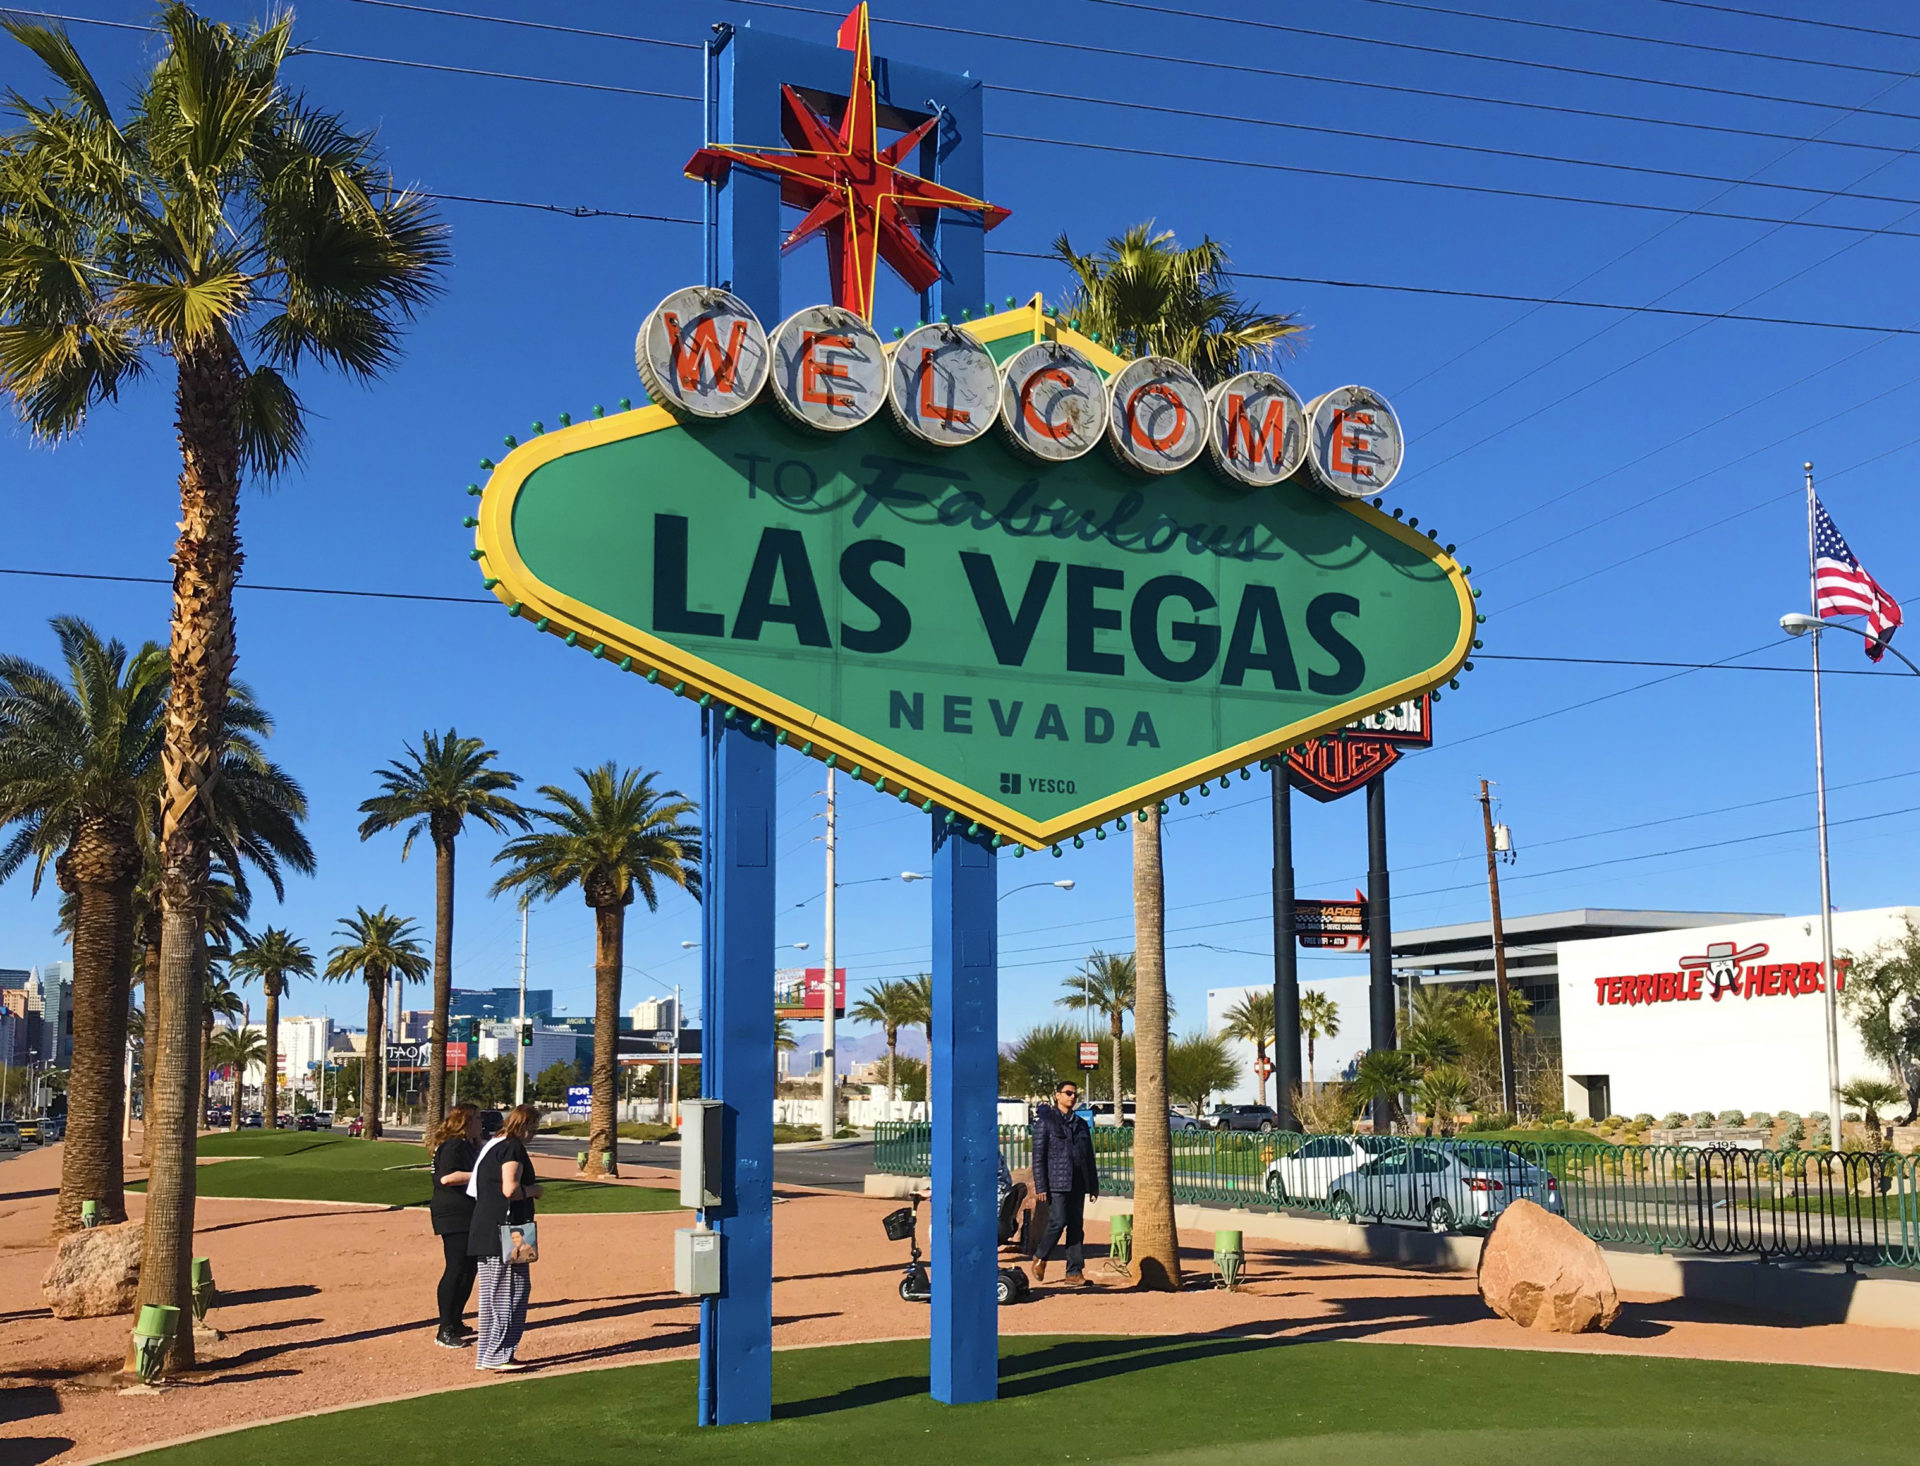 The iconic Welcome to Las Vegas sign features bold, neon-lit lettering set placed in Paradise, Nevada where palm trees surrounded the sign